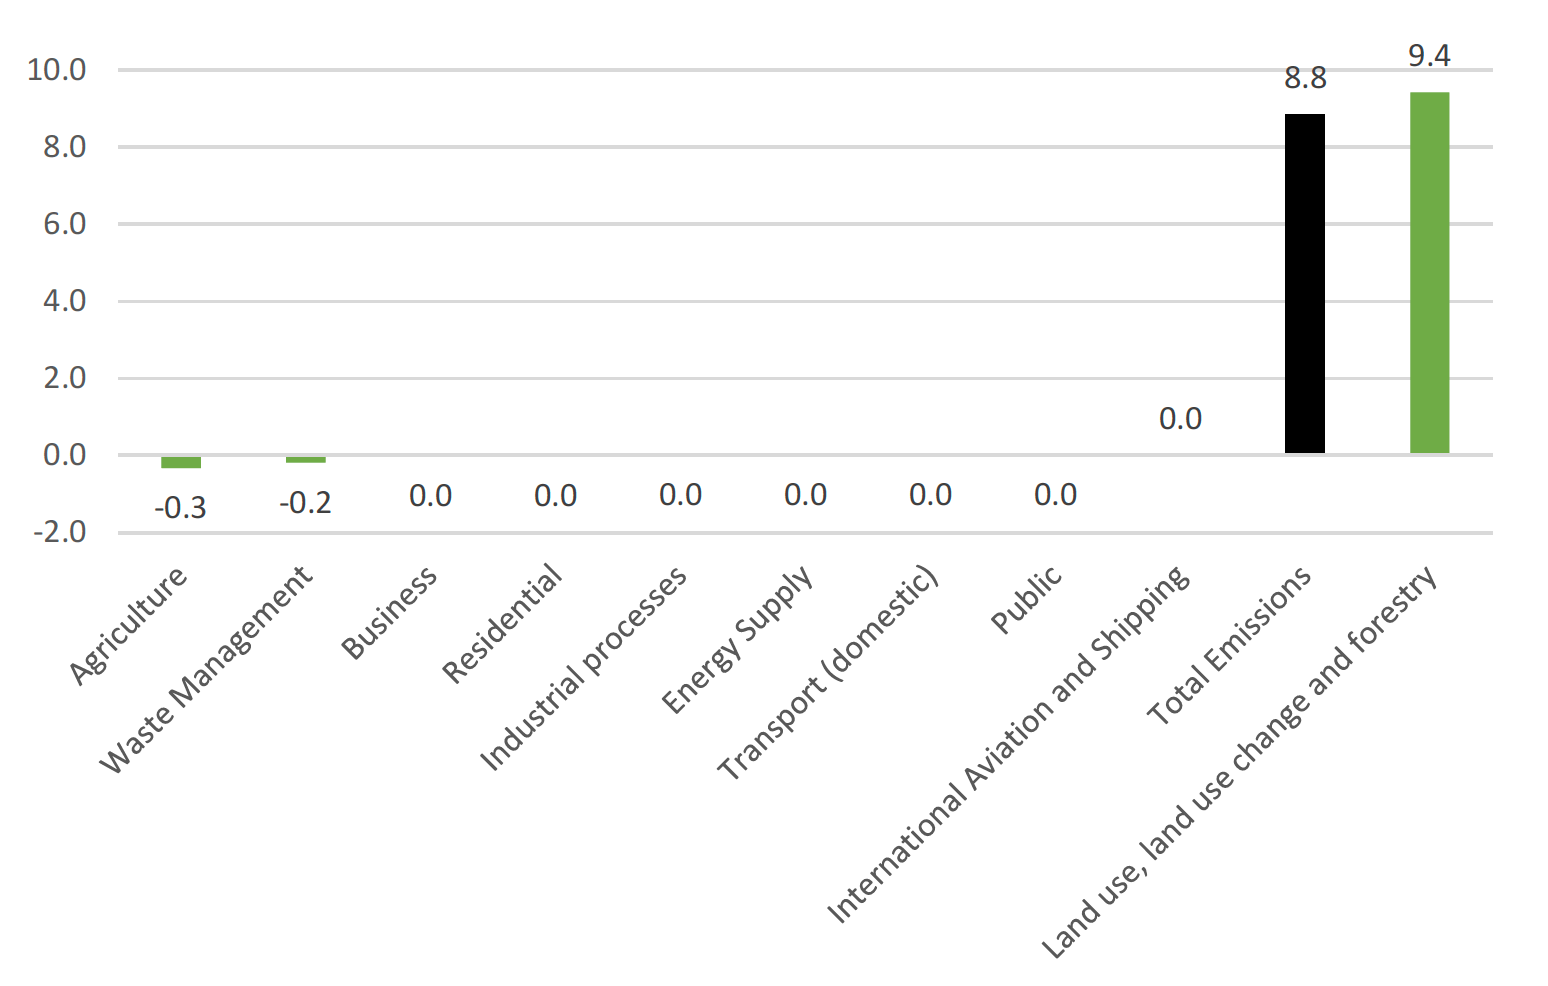 Chart showing scale of revisions between the latest and previous publications by sector in the baseline period.